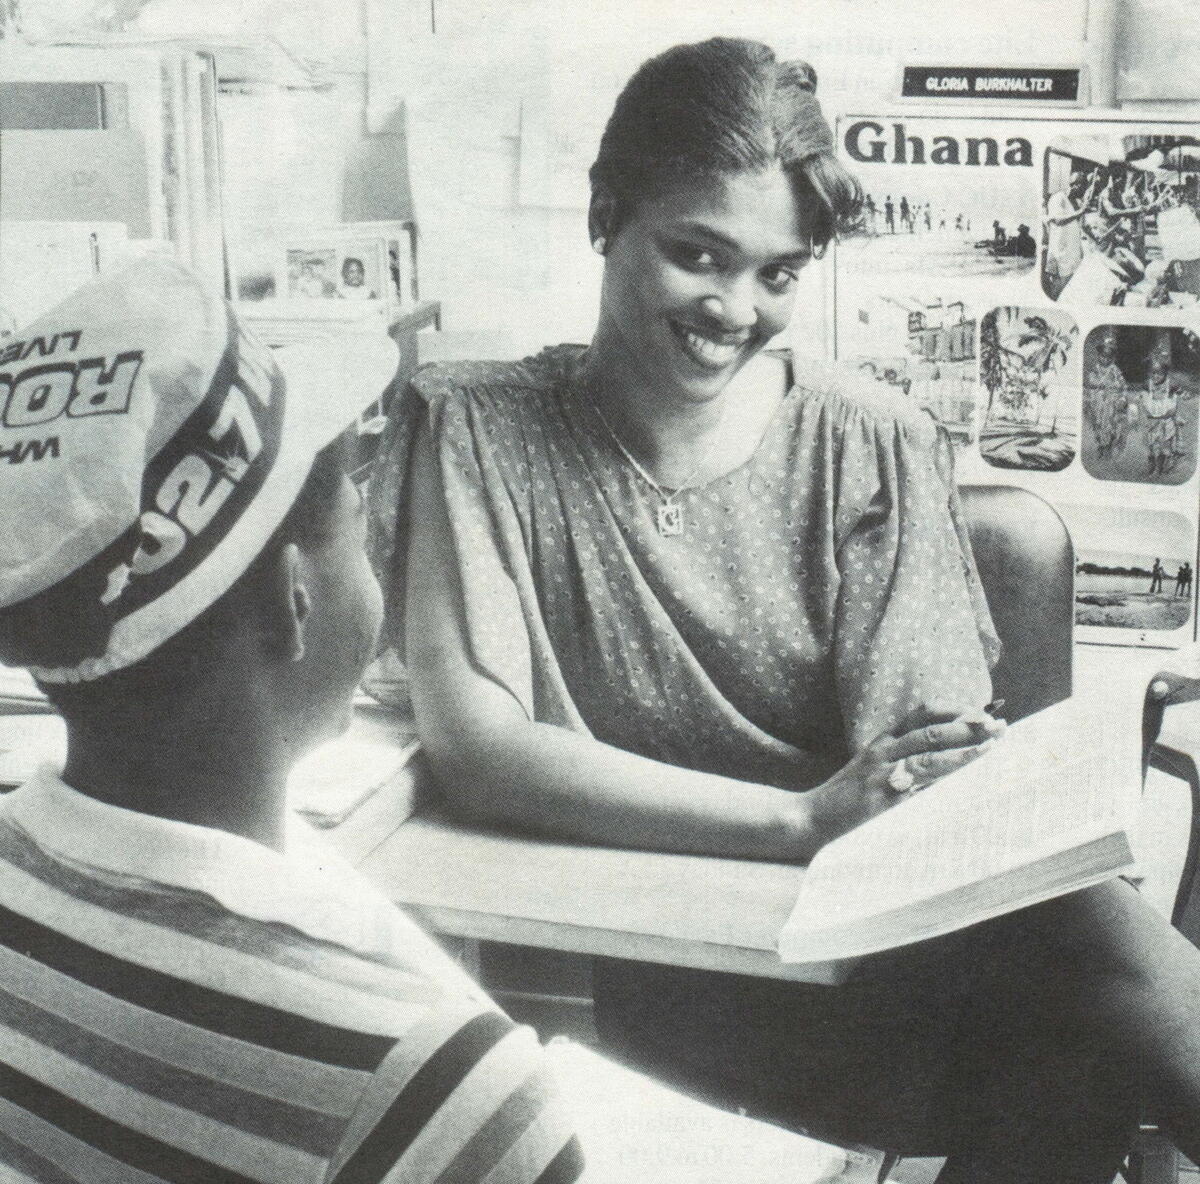 EOP counselor advising student during the mid 1960s